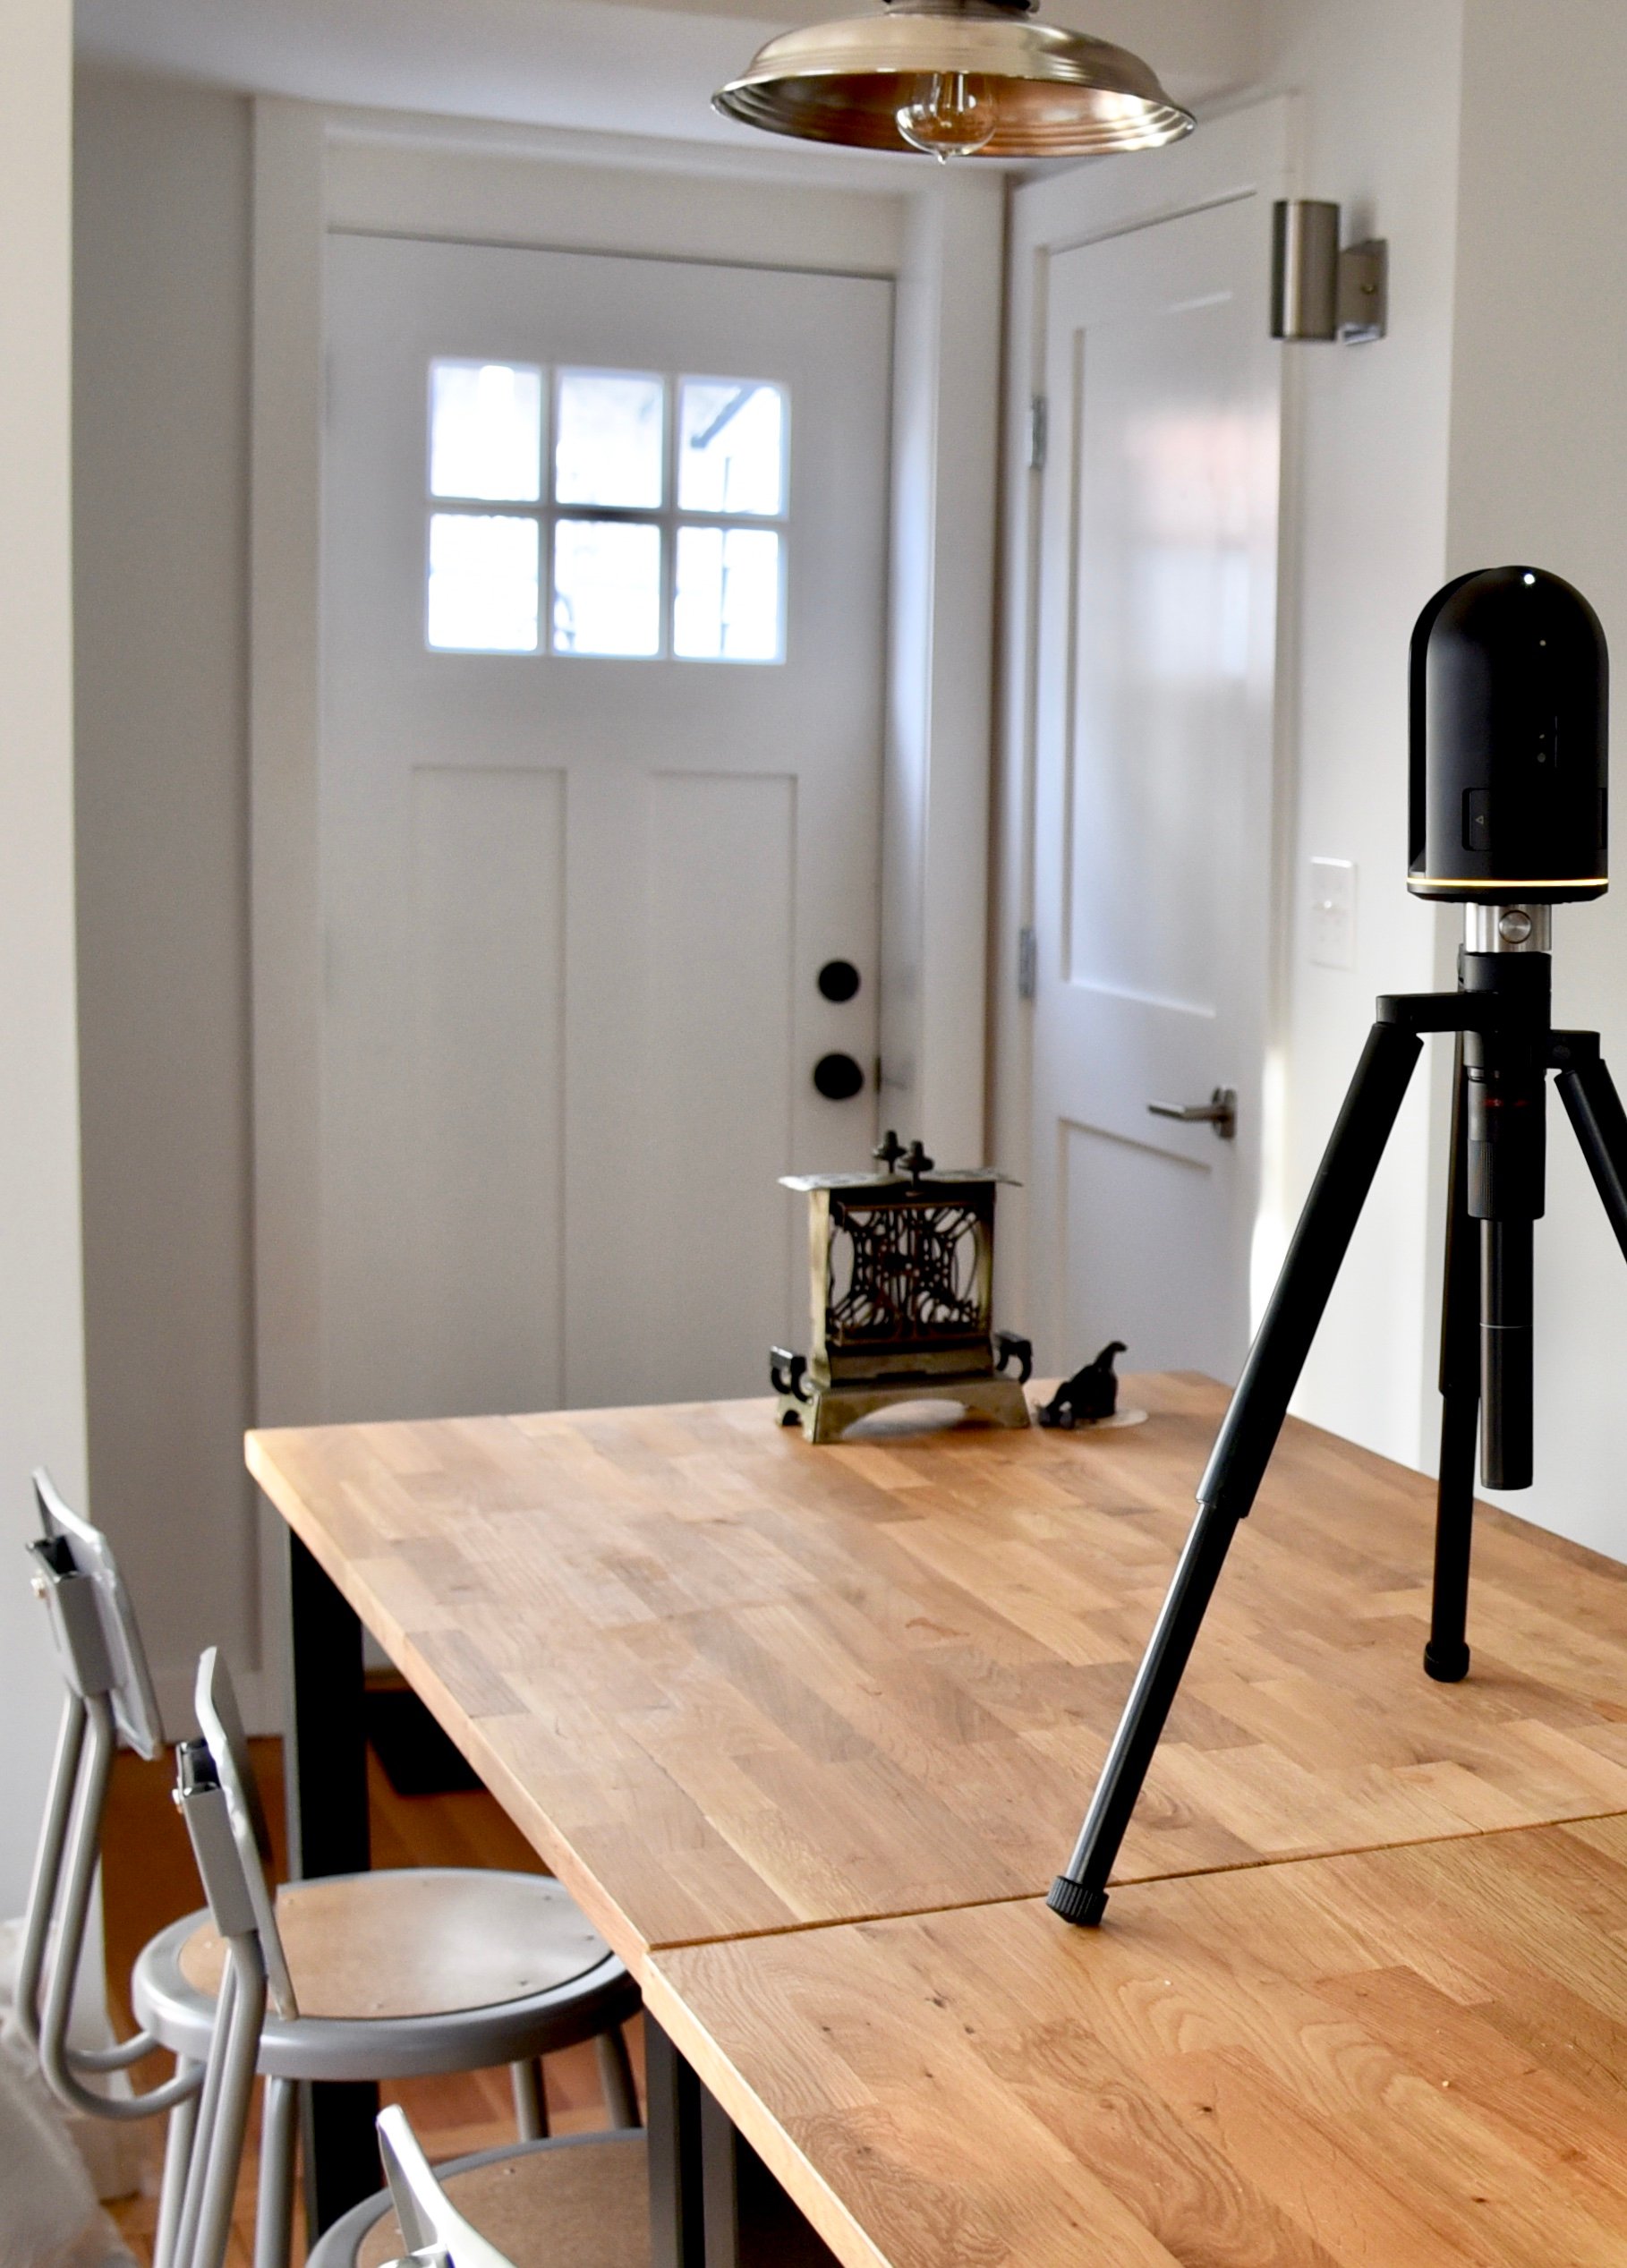 BLK360 mounted on table